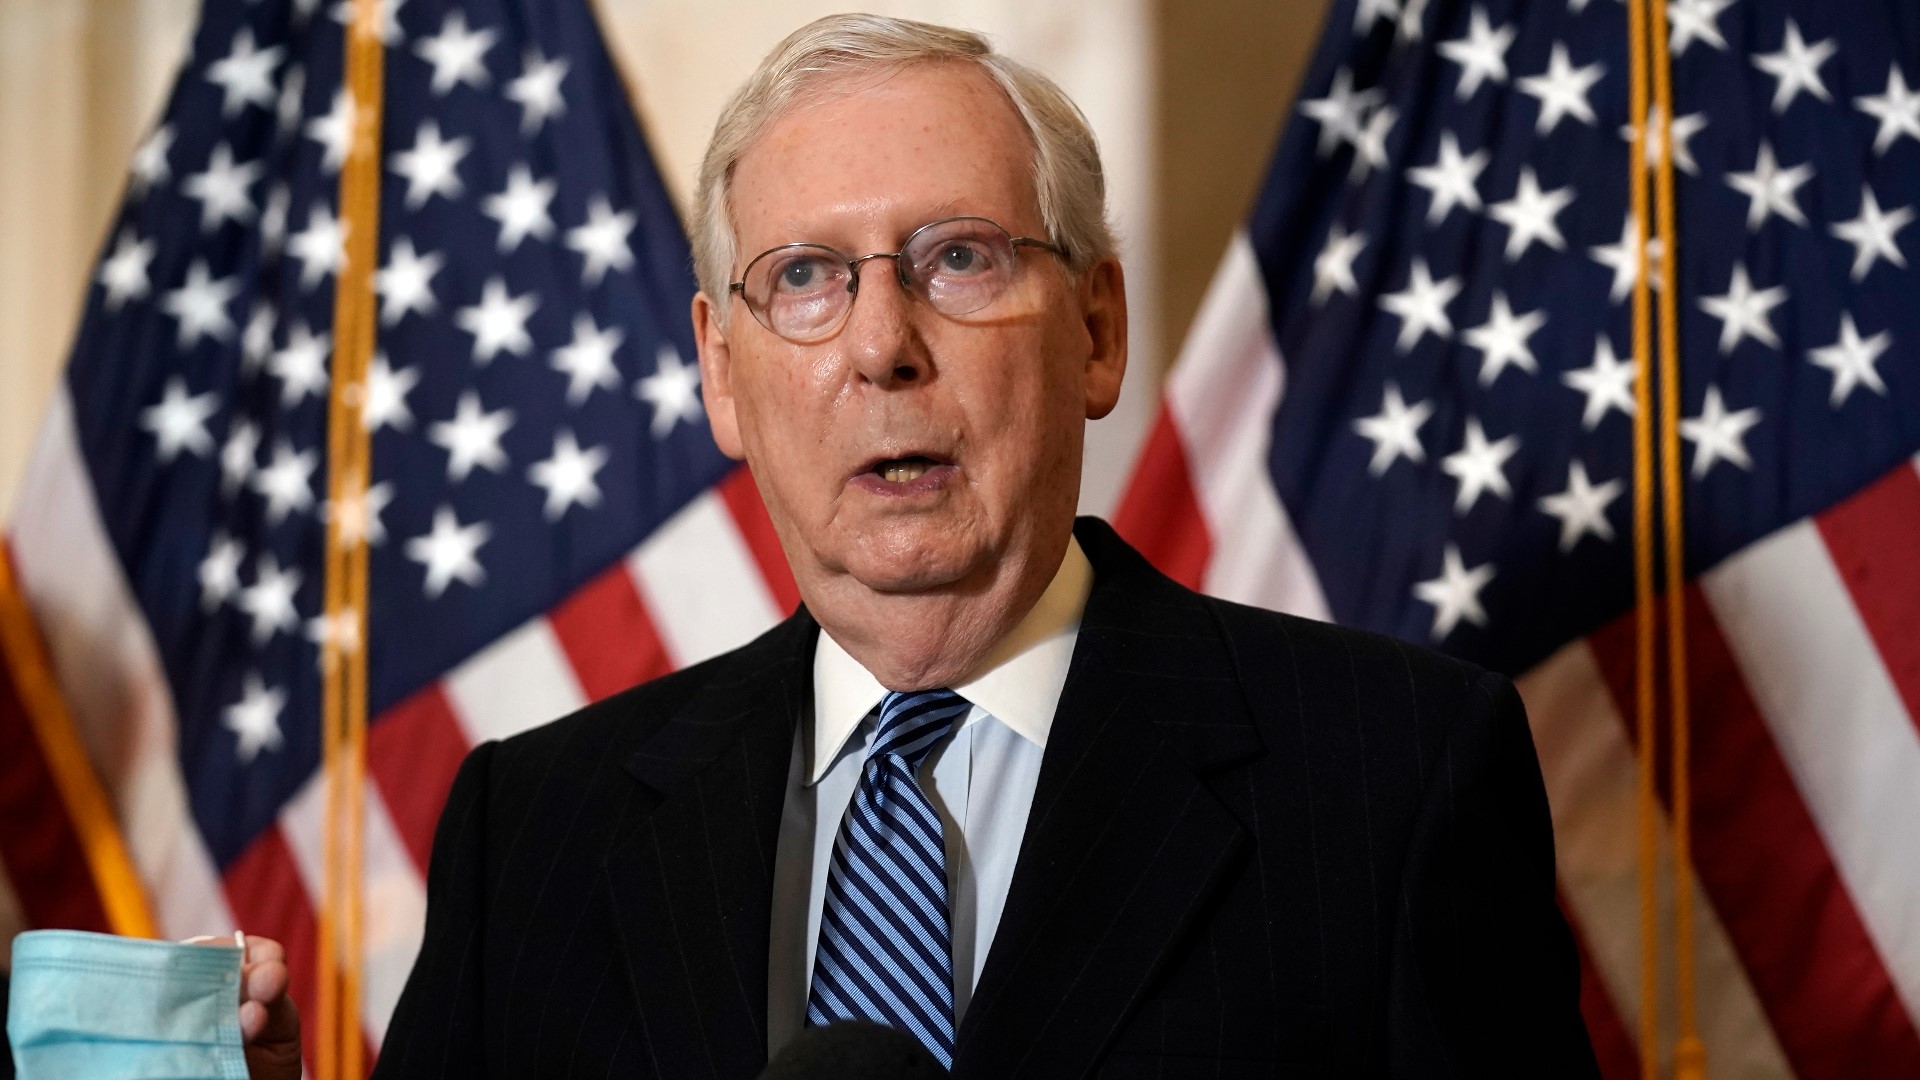 Senate Majority Leader Mitch McConnell congratulated Democrat Joe Biden as President-elect on Tuesday (local time), saying the Electoral College "has spoken".